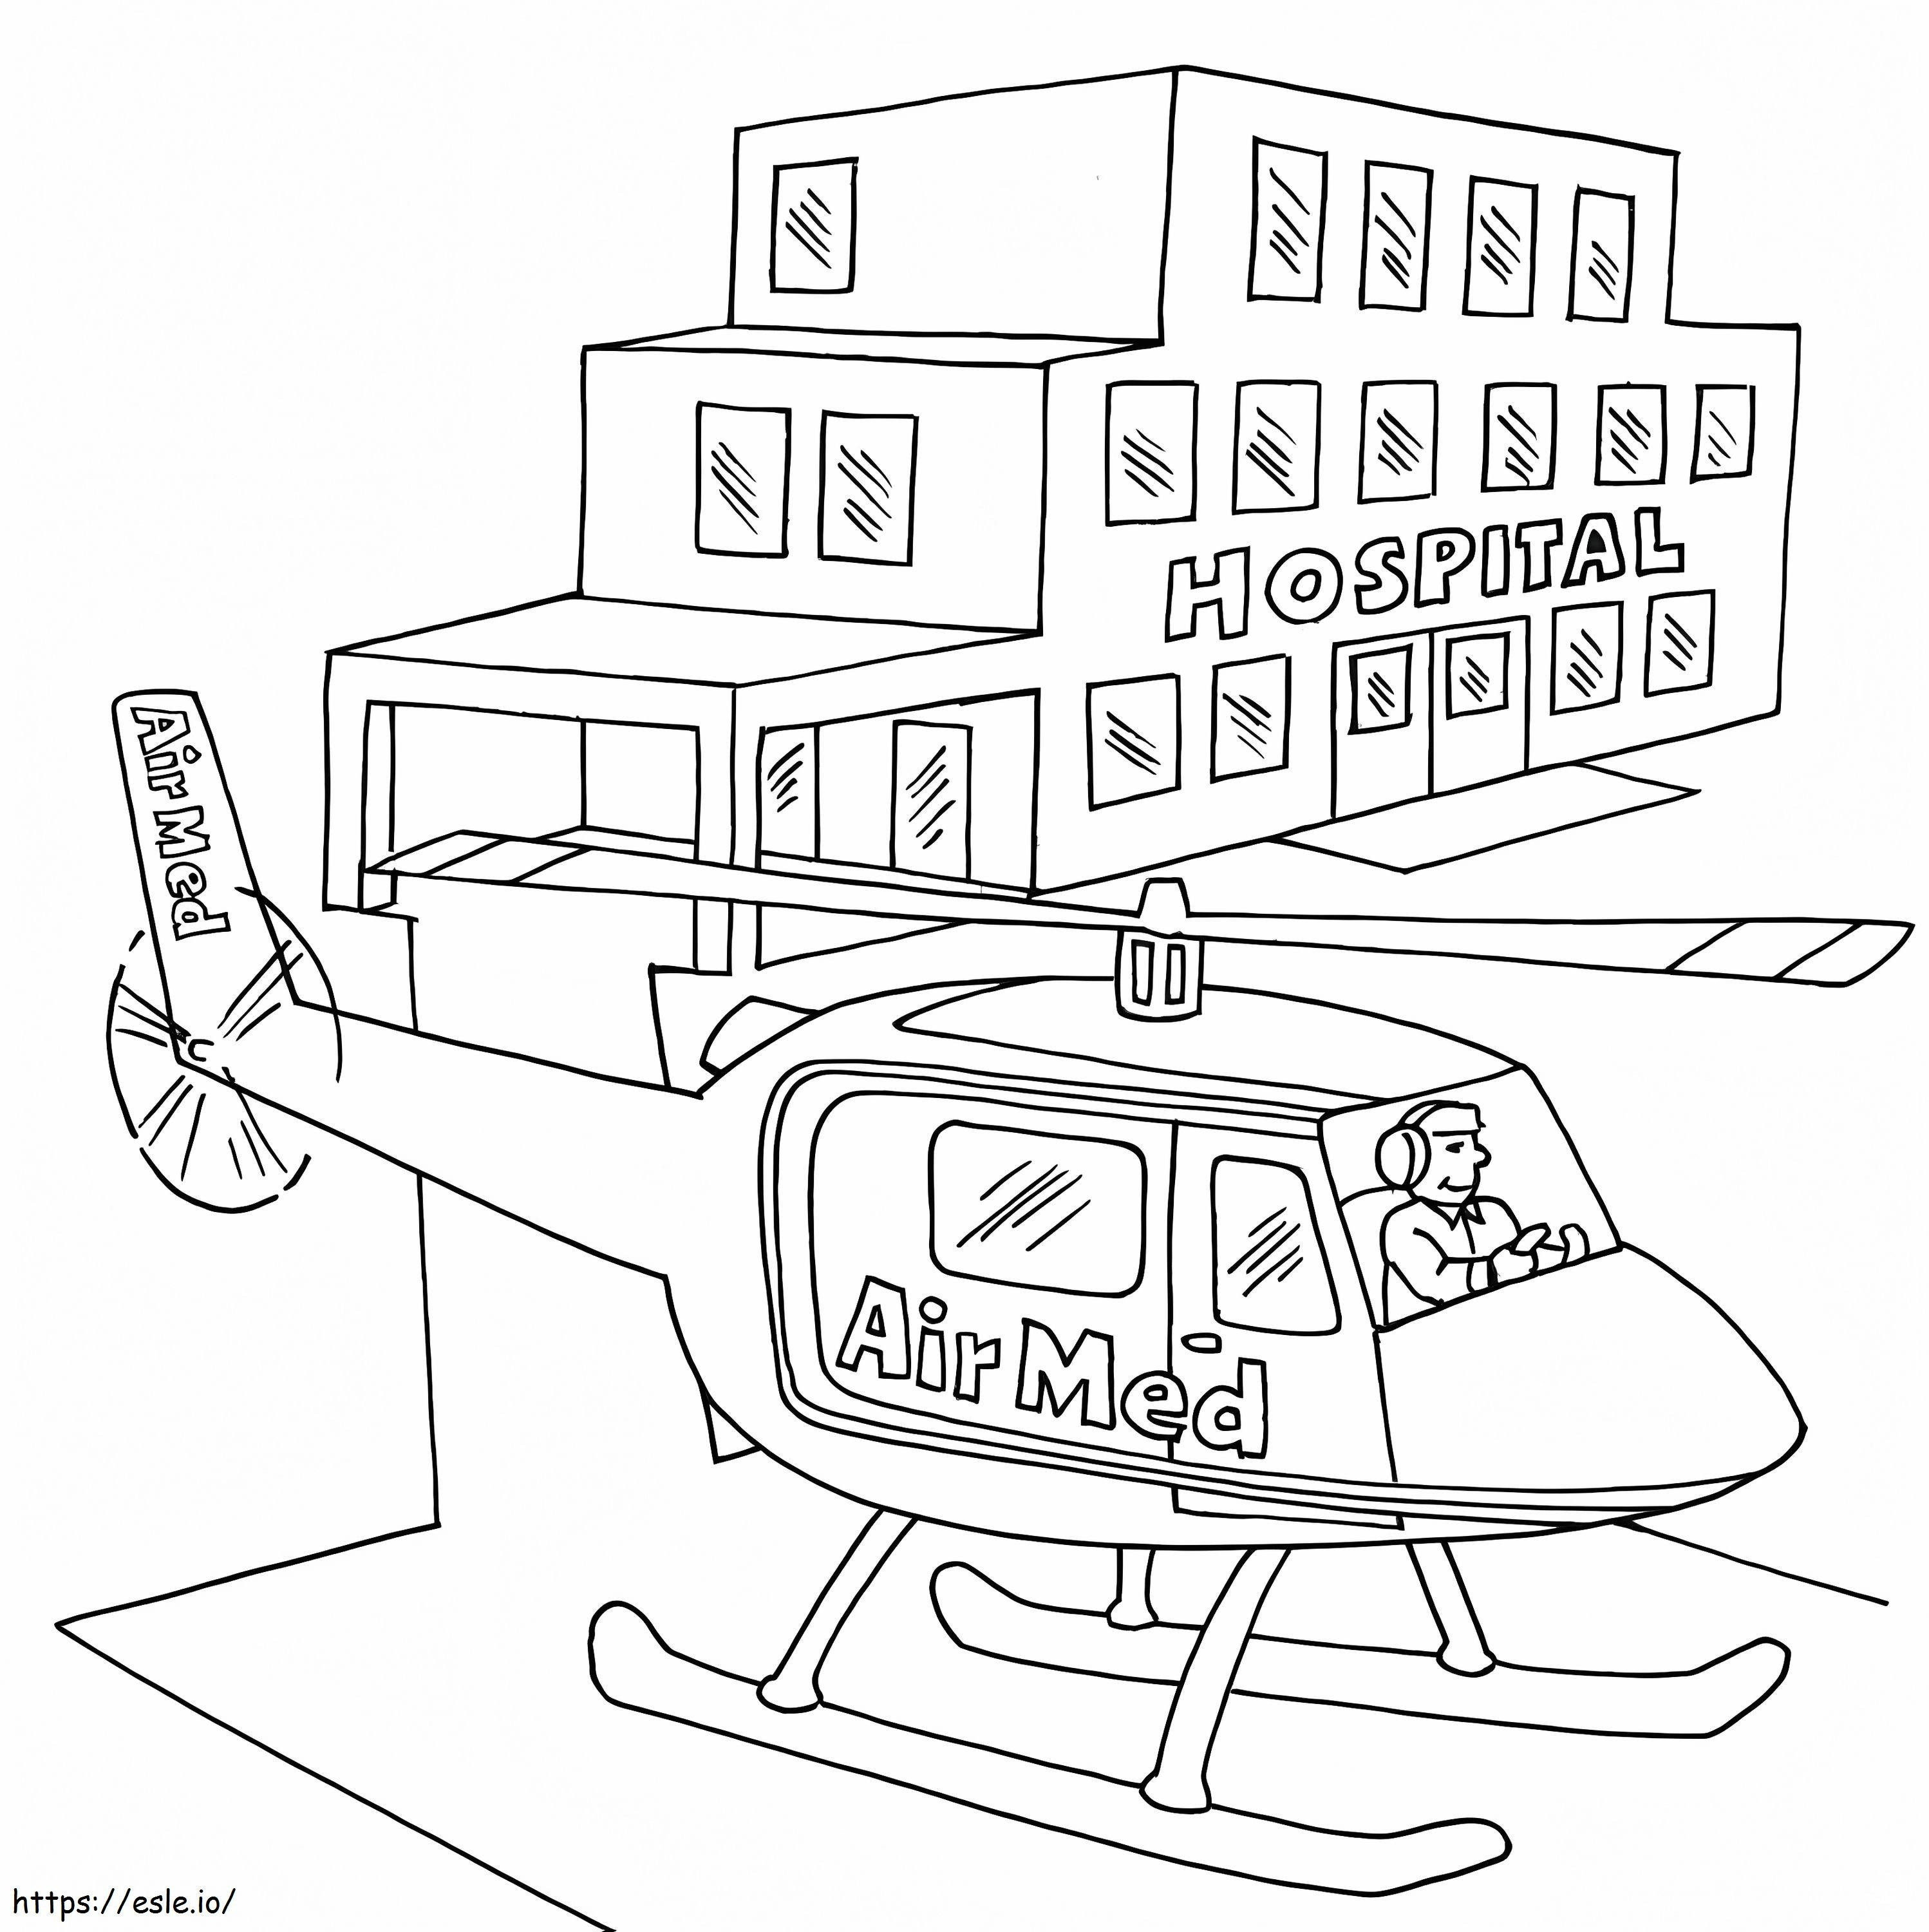 Air Med And Hospital coloring page